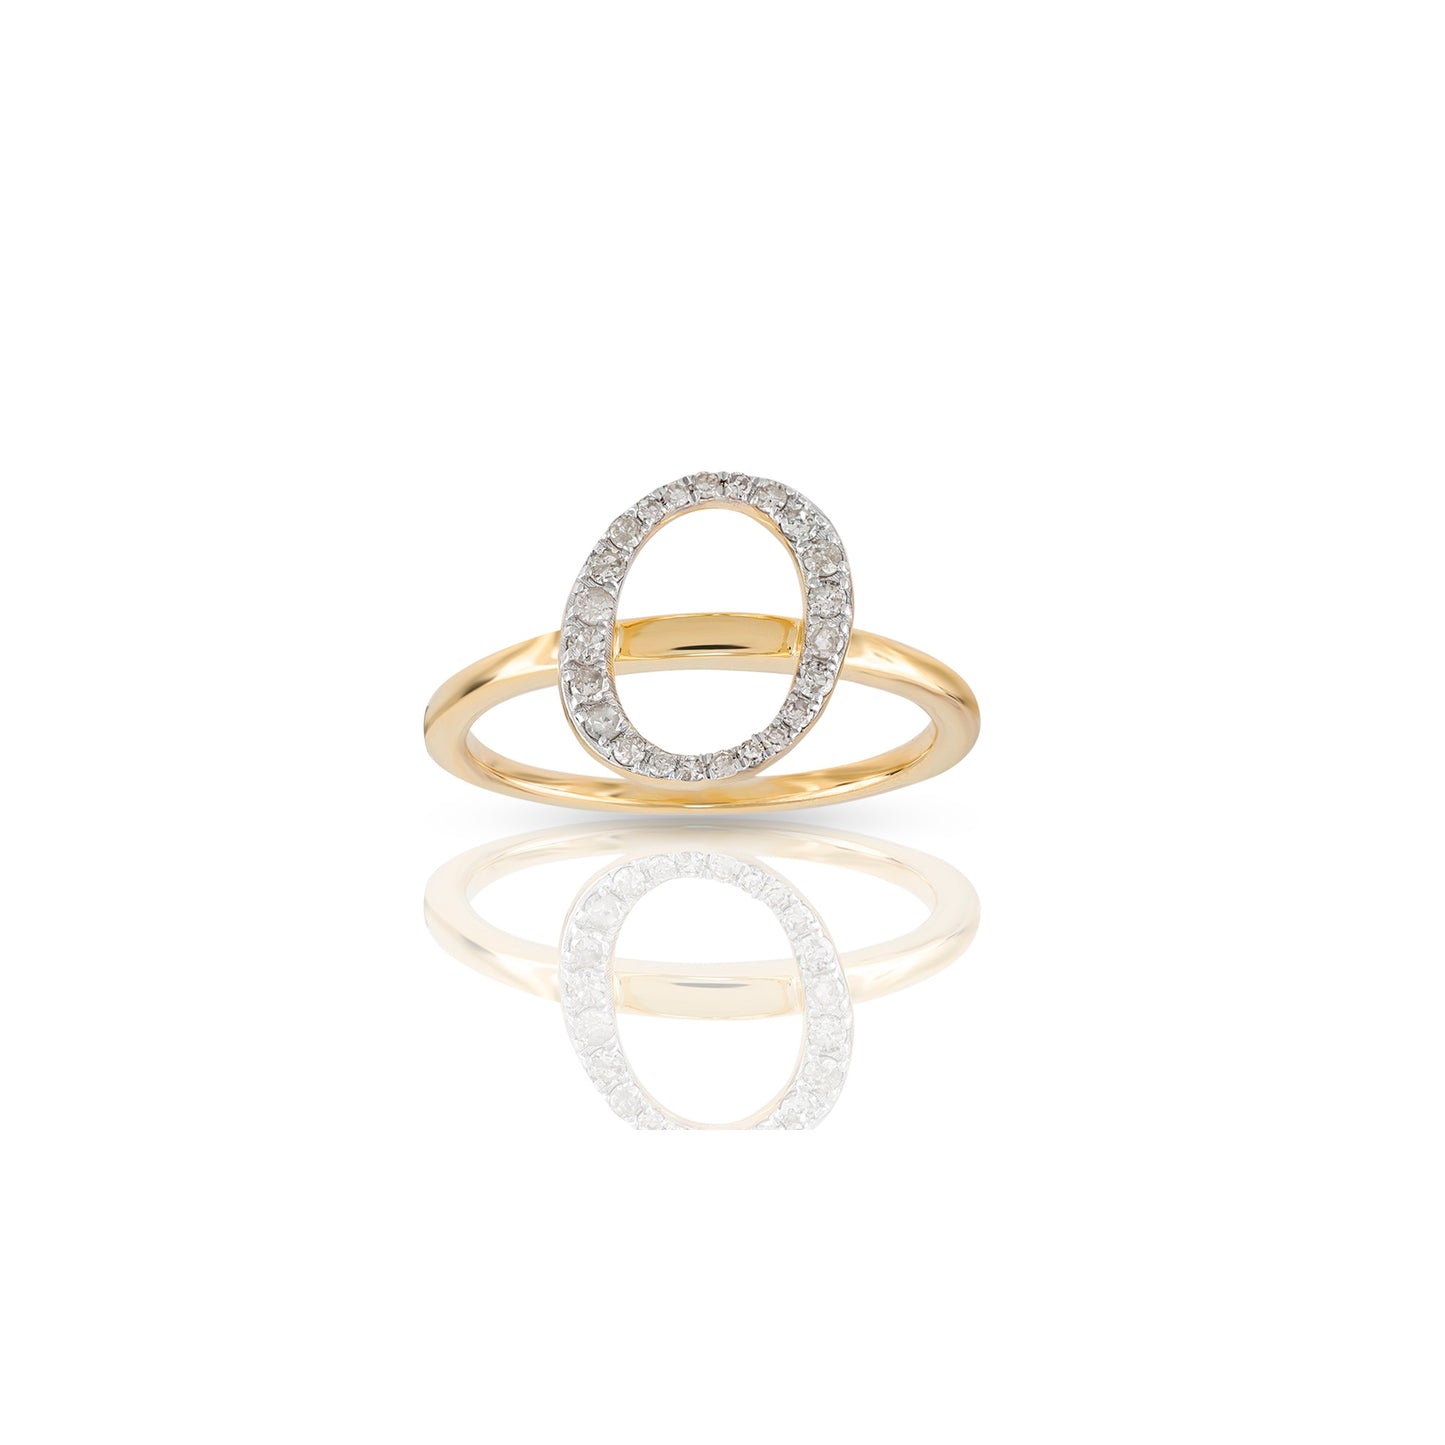 14K Gold Yellow Gold Round Diamond' 'A TO Z' Initial Letter Ring by Truth jewel